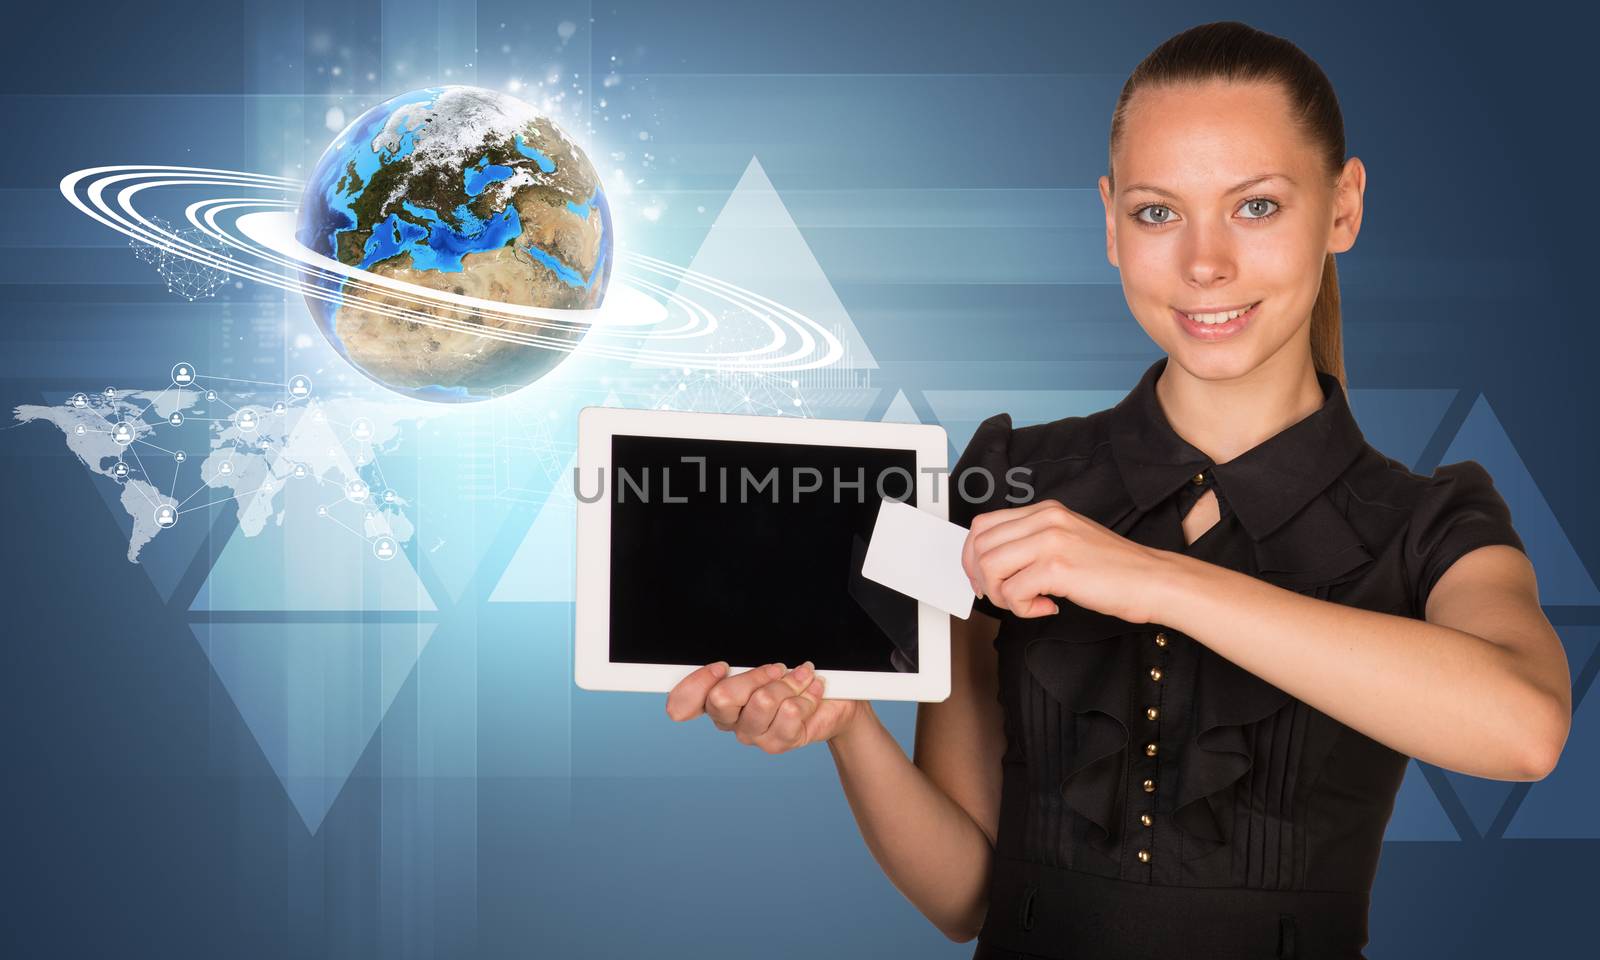 Smiling young woman holging tablet and blank card with glowing 3d Earth model and looking at camera on abstract blue background. Elements of this image furnished by NASA